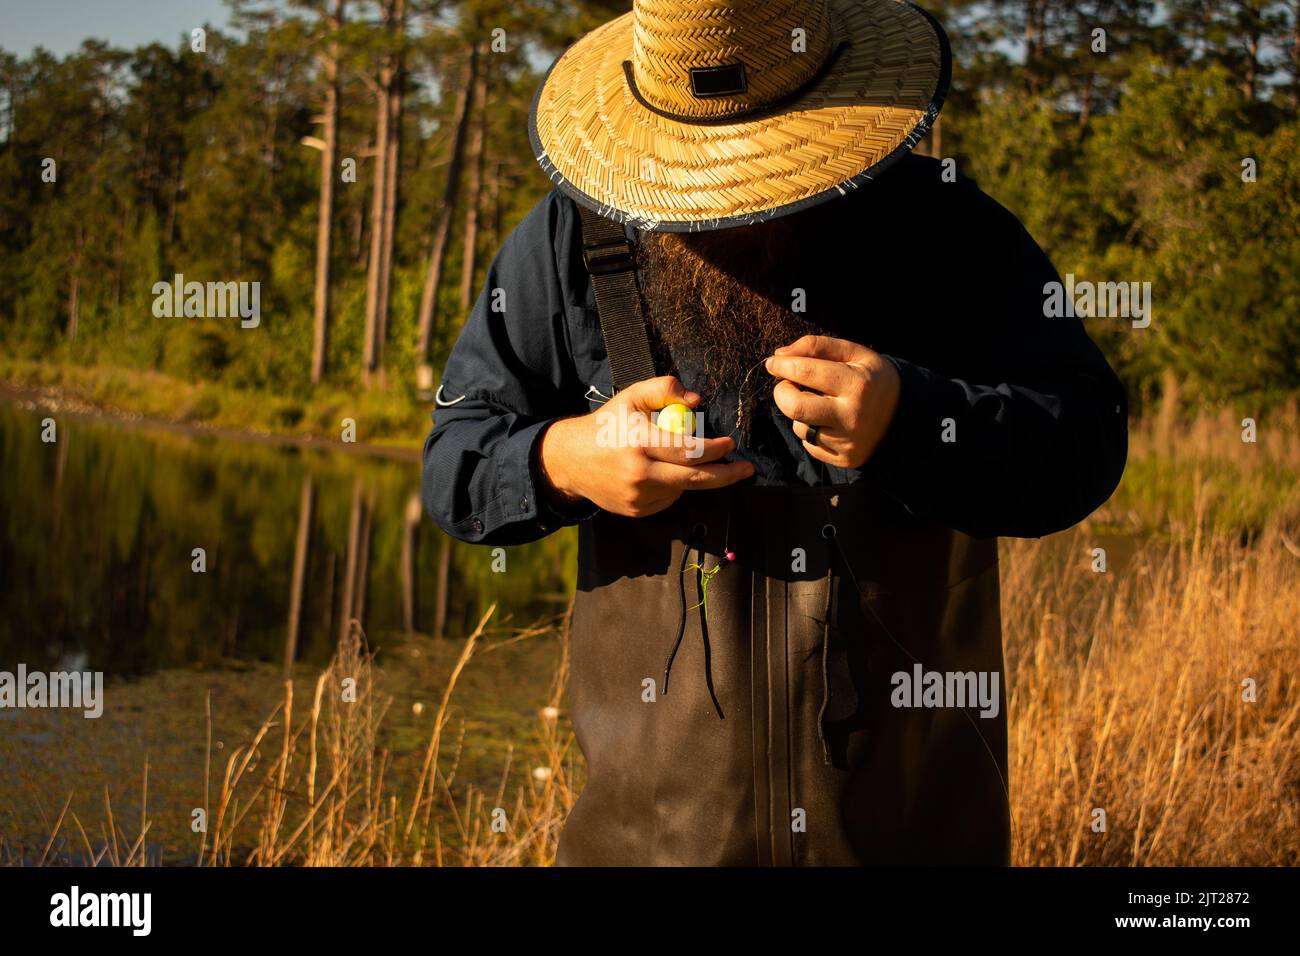 Fisherman in waders detangling line for fly fishing at lake Stock Photo